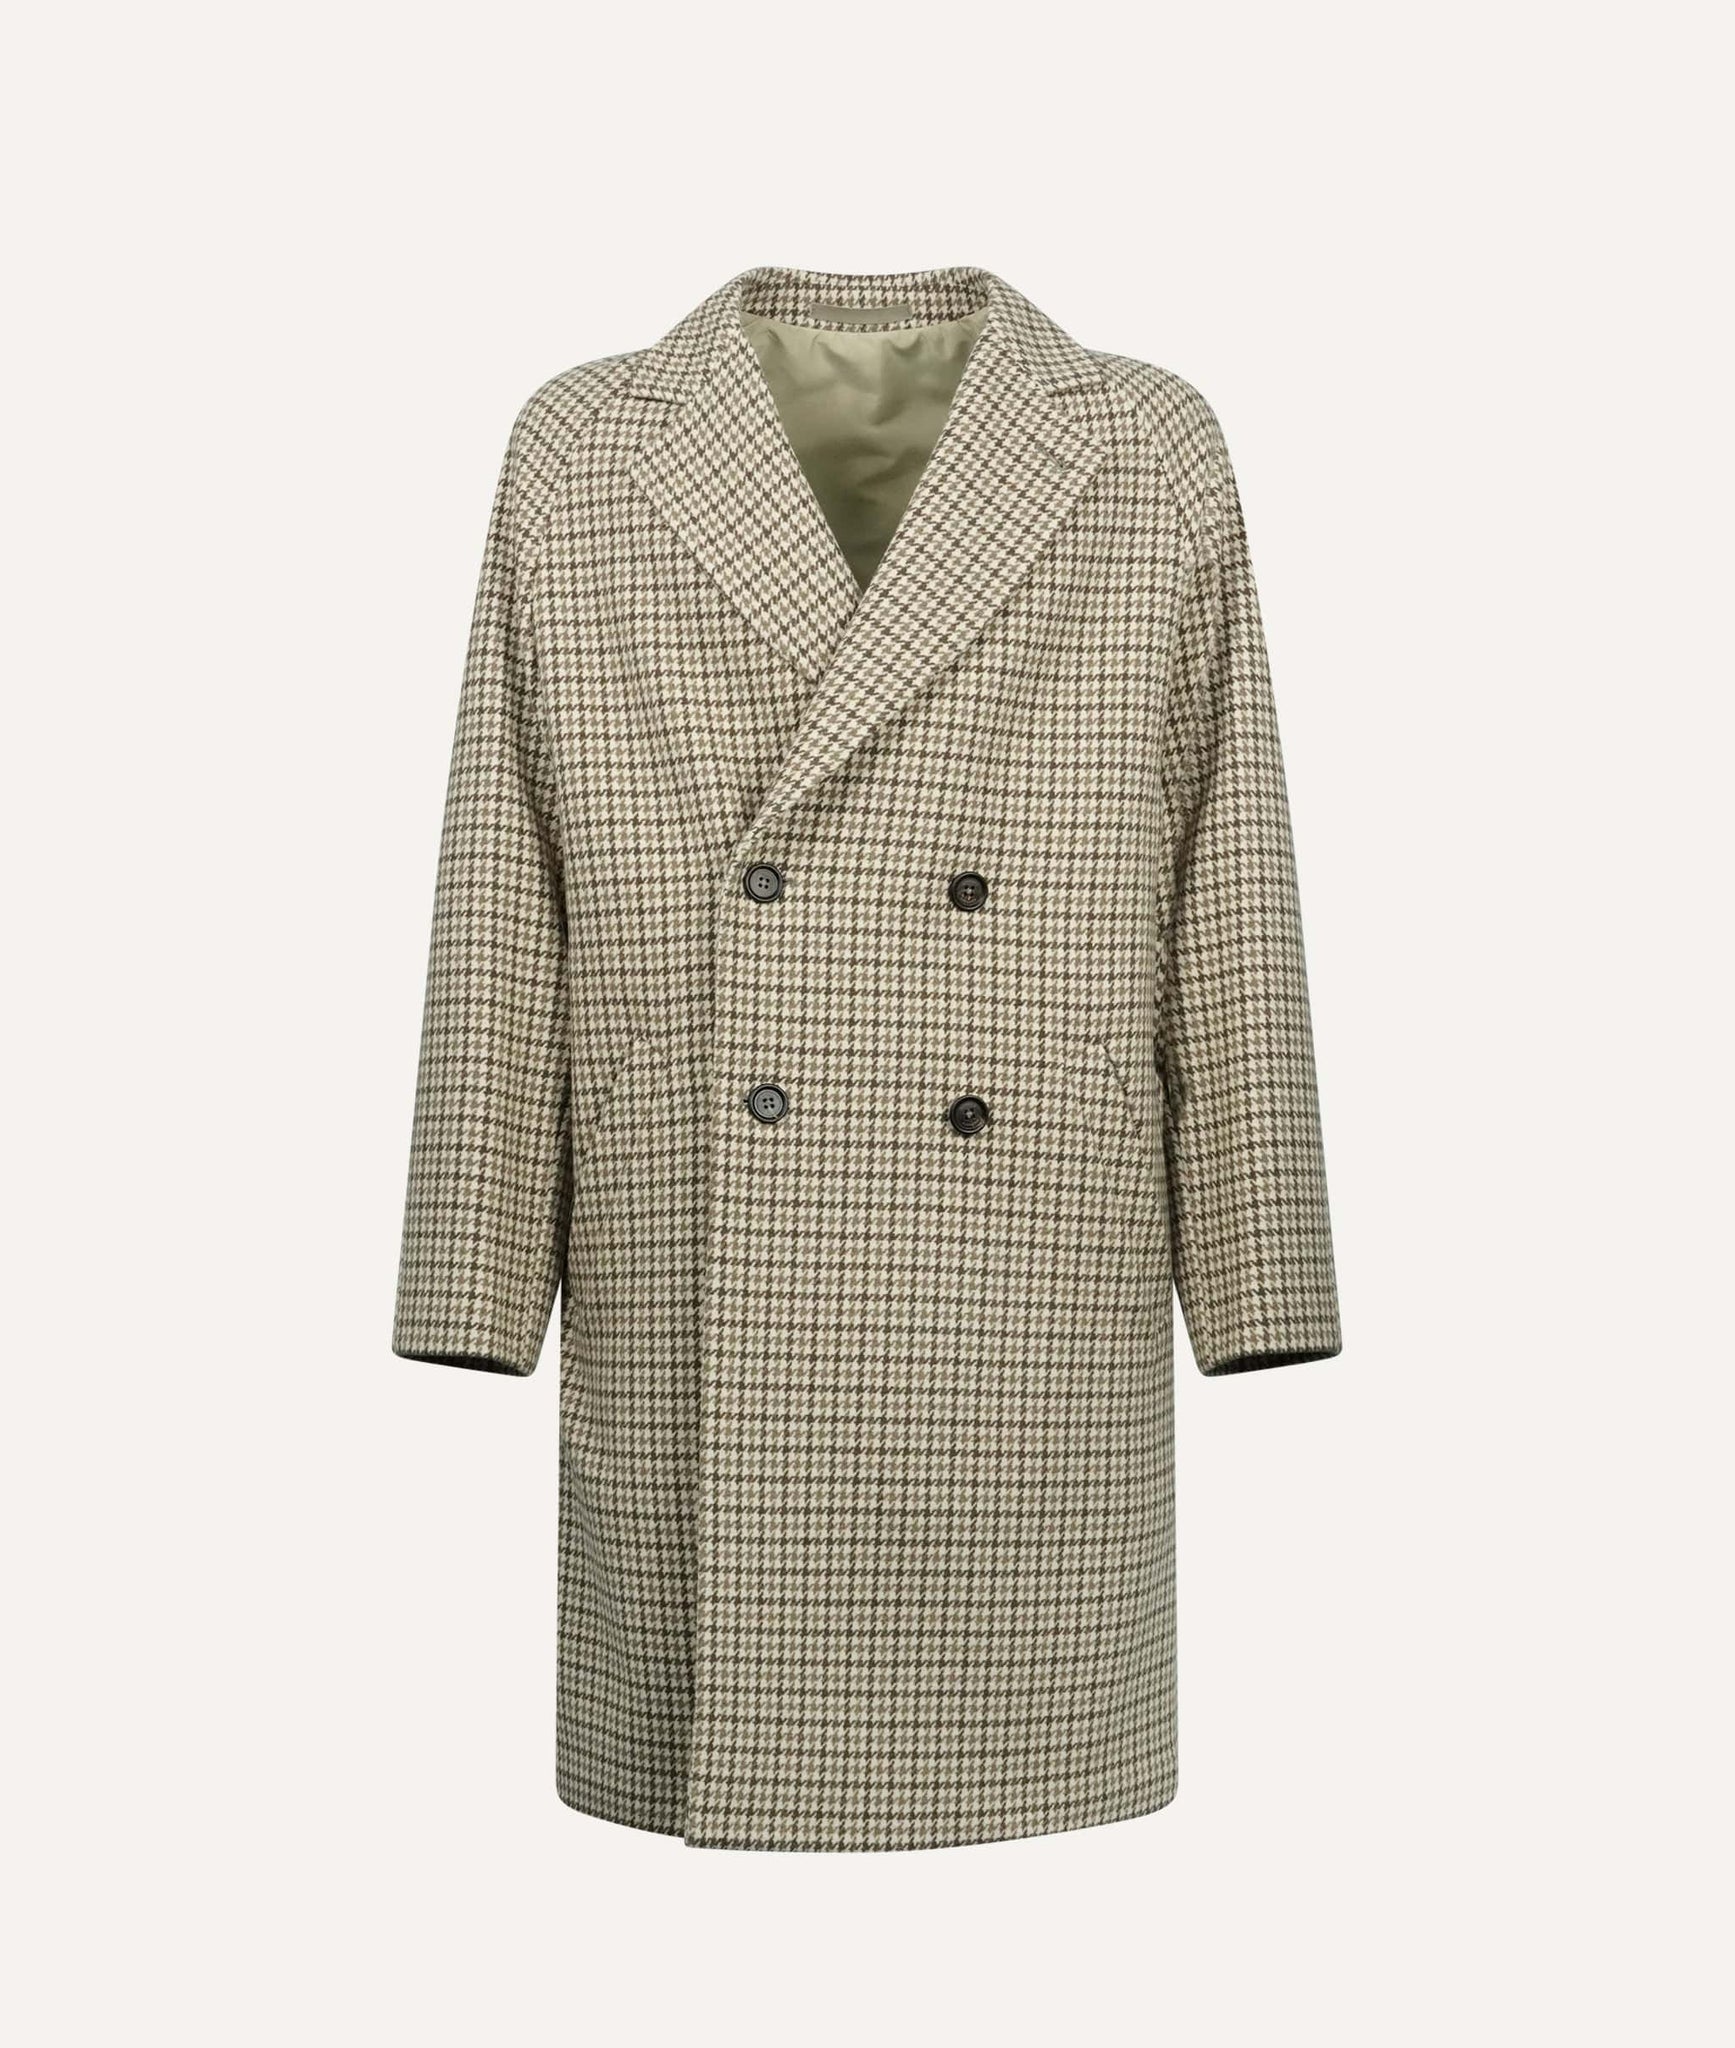 Eleventy - Double-Breasted Coat in Wool & Cashmere